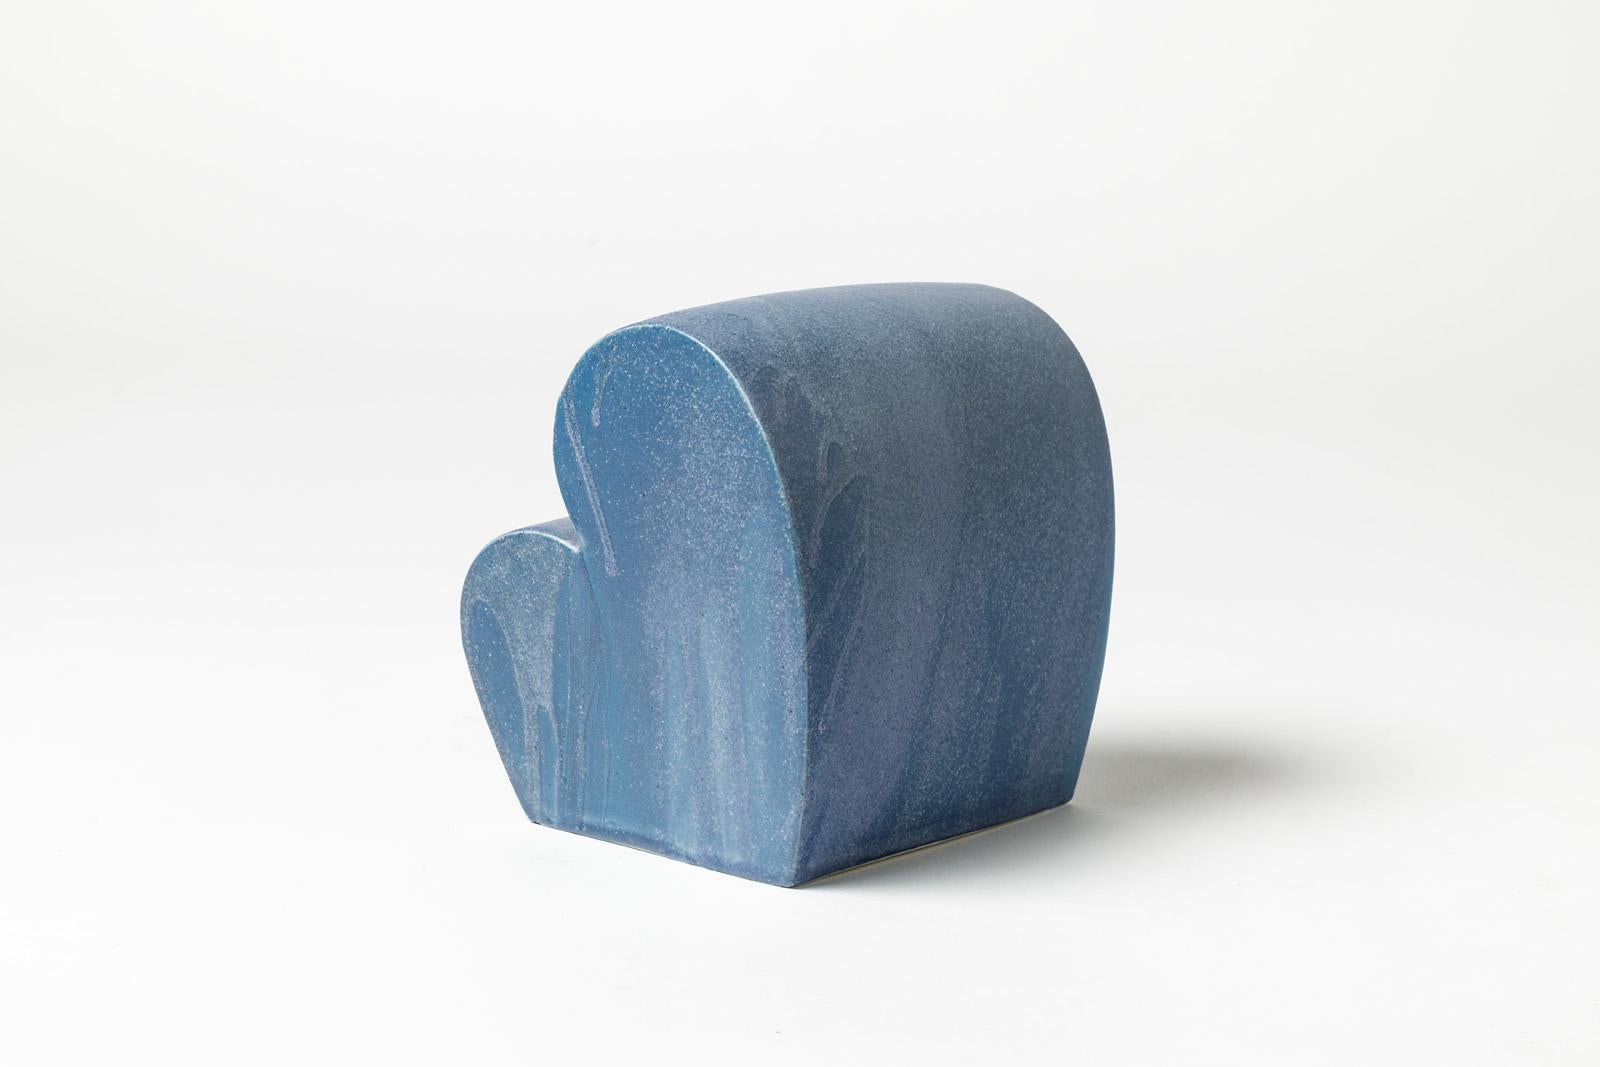 Contemporary Ceramic Sculpture by Julia Huteau, Abstract Form 1